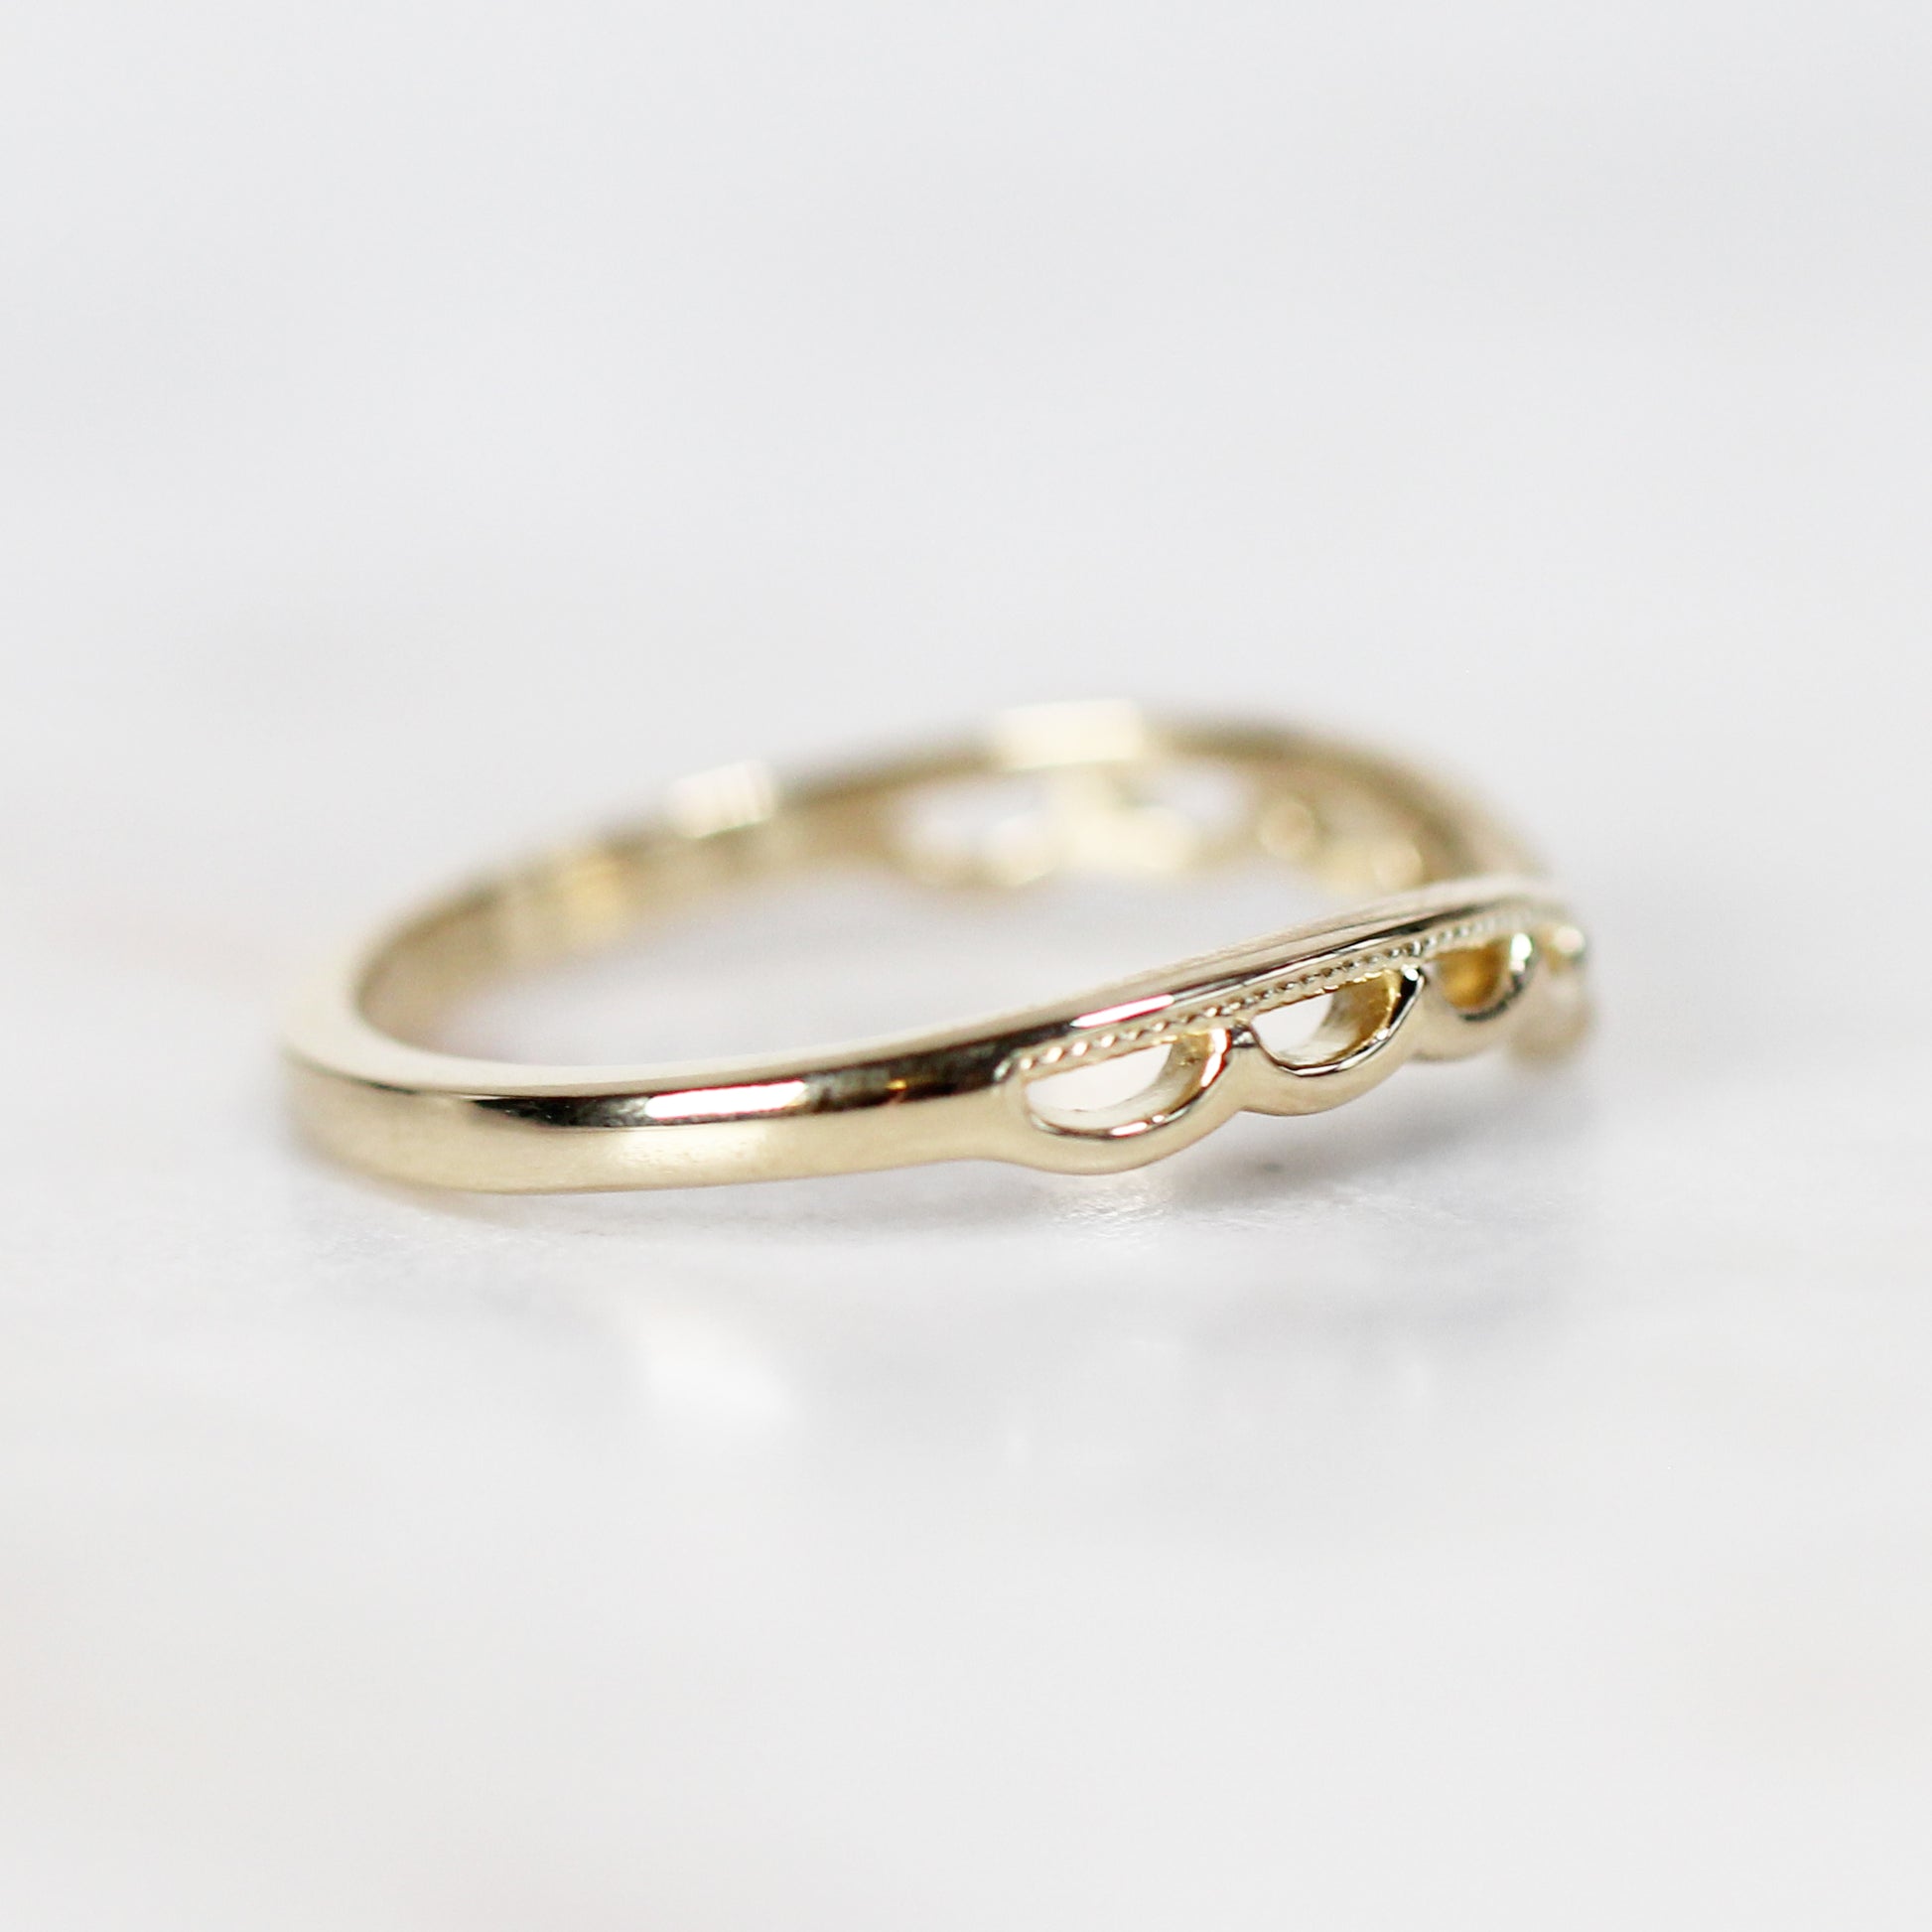 Juniper Lace Contour V Ring - Your Choice of 14k Gold - Midwinter Co. Alternative Bridal Rings and Modern Fine Jewelry